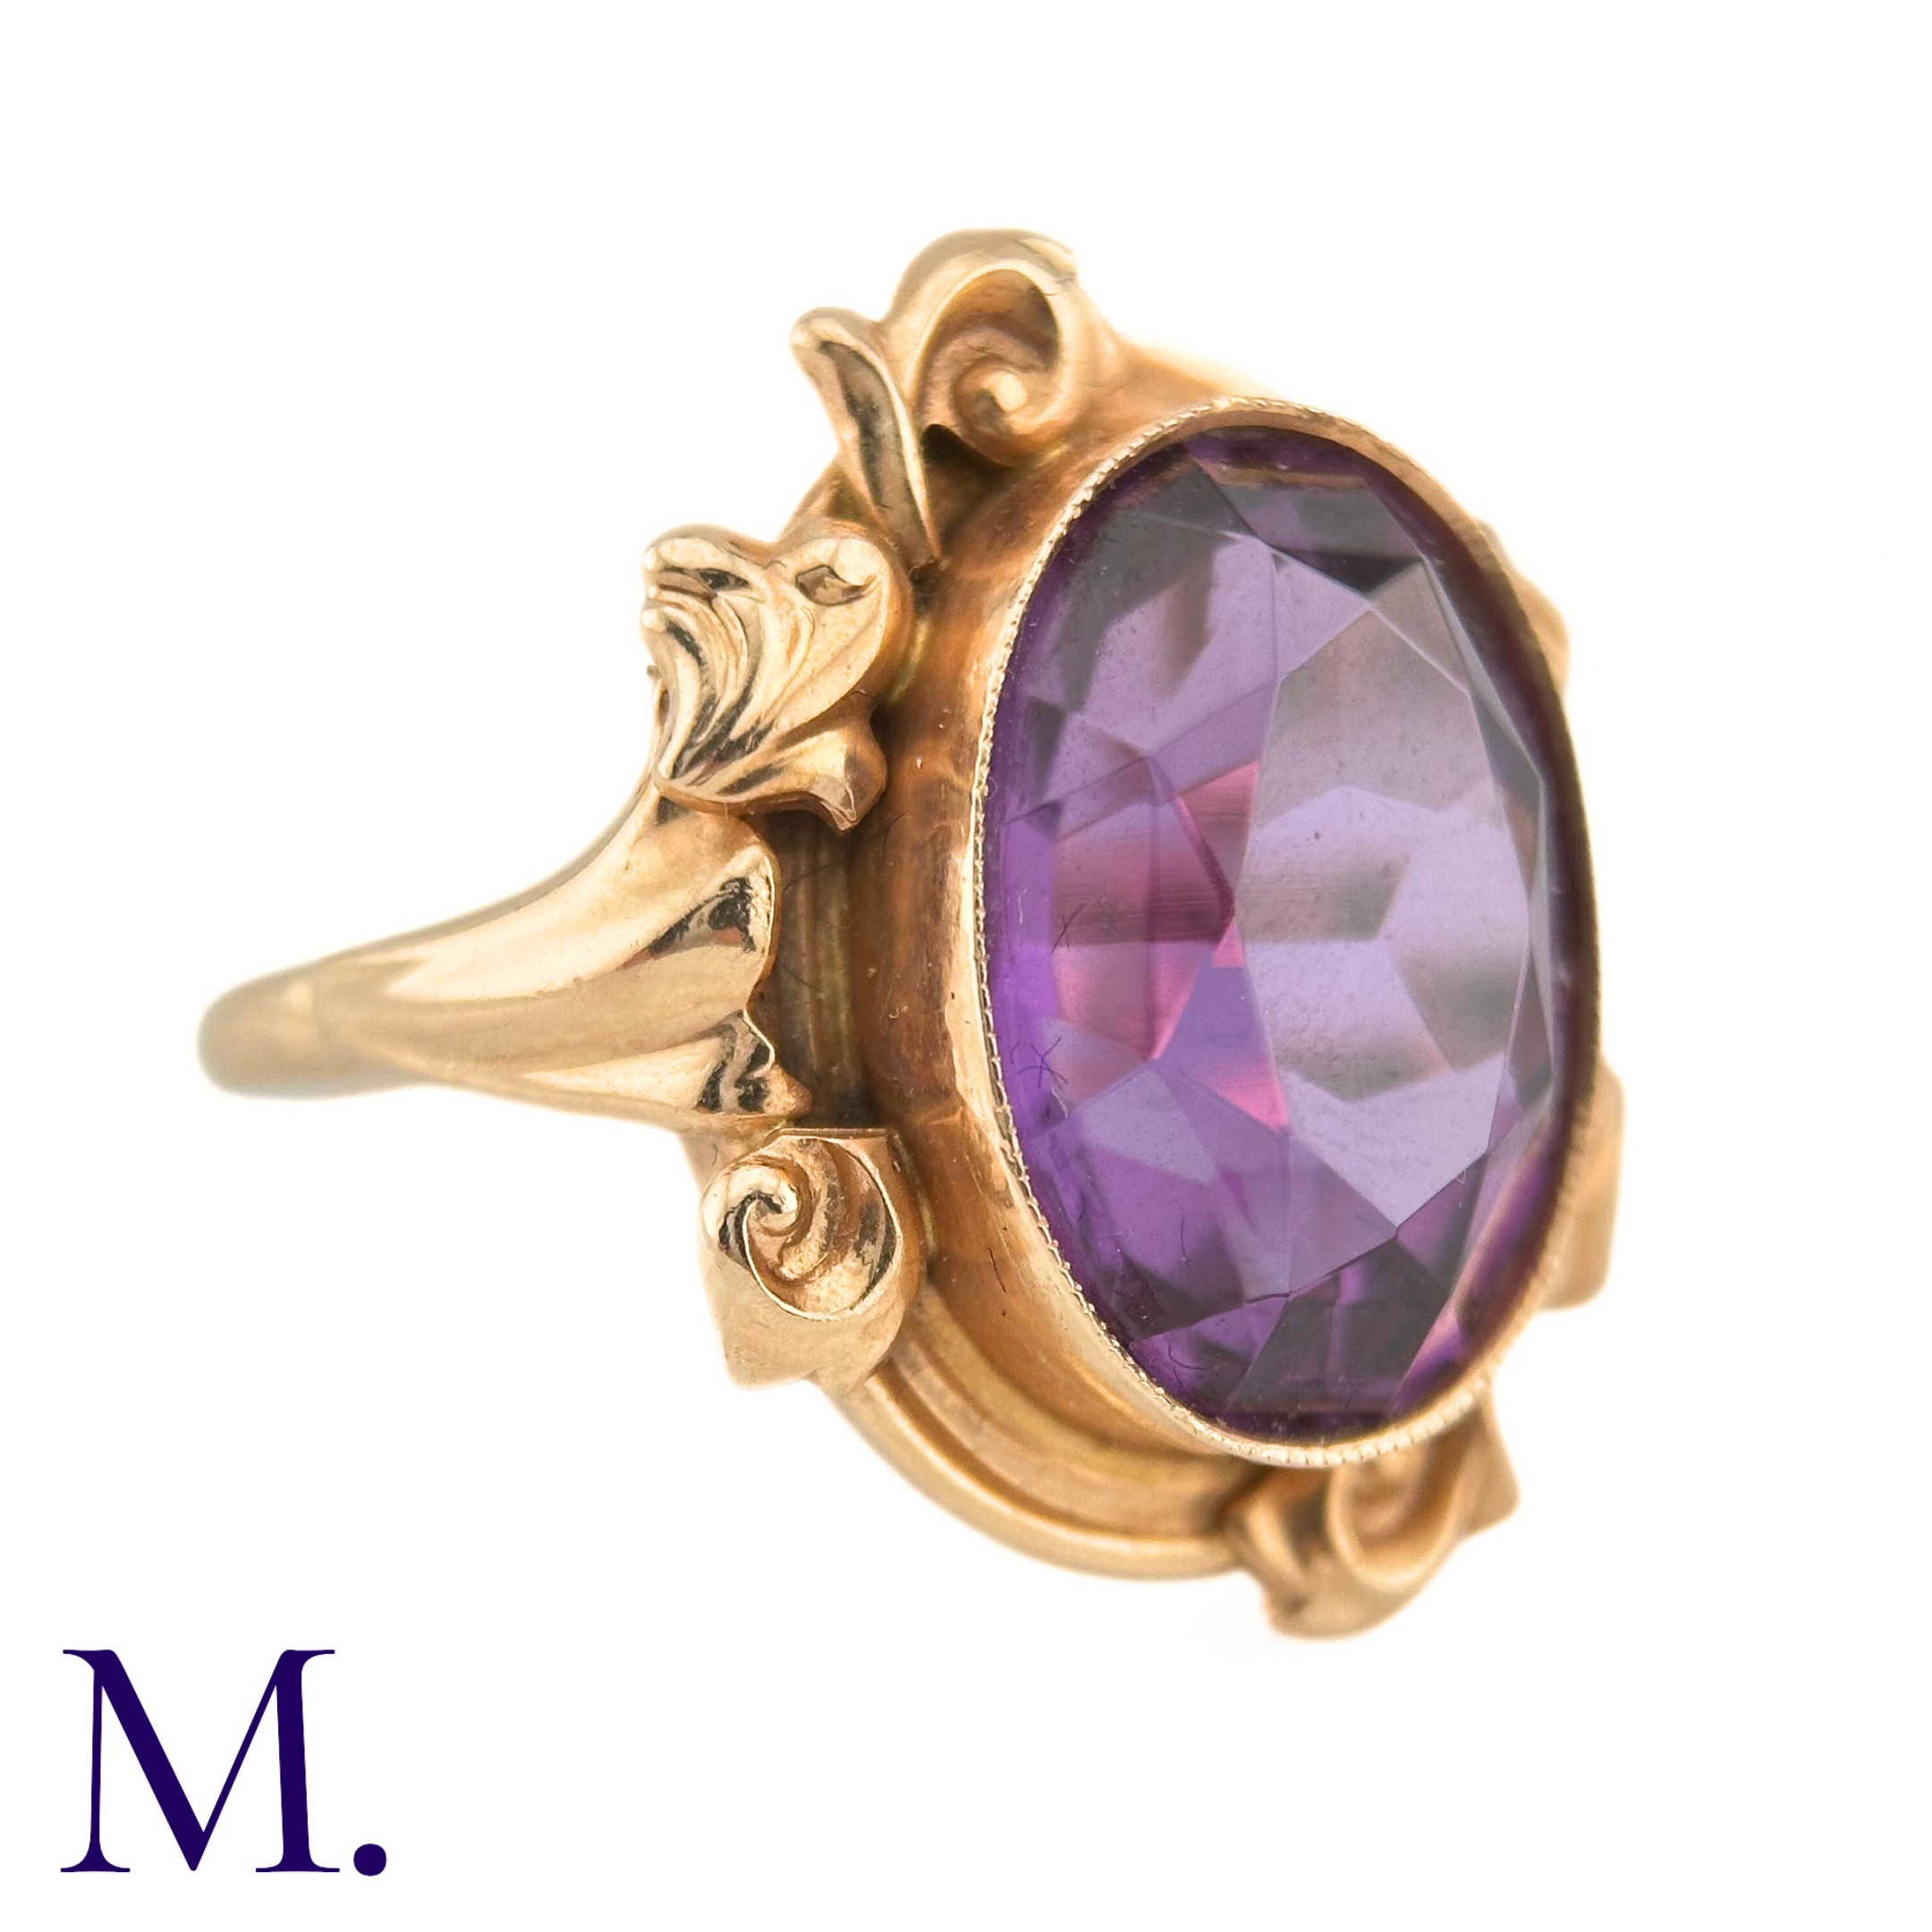 A Russian Purple Sapphire Ring The 14ct rose gold ring, with Russian hallmarks, is set with a - Image 3 of 6